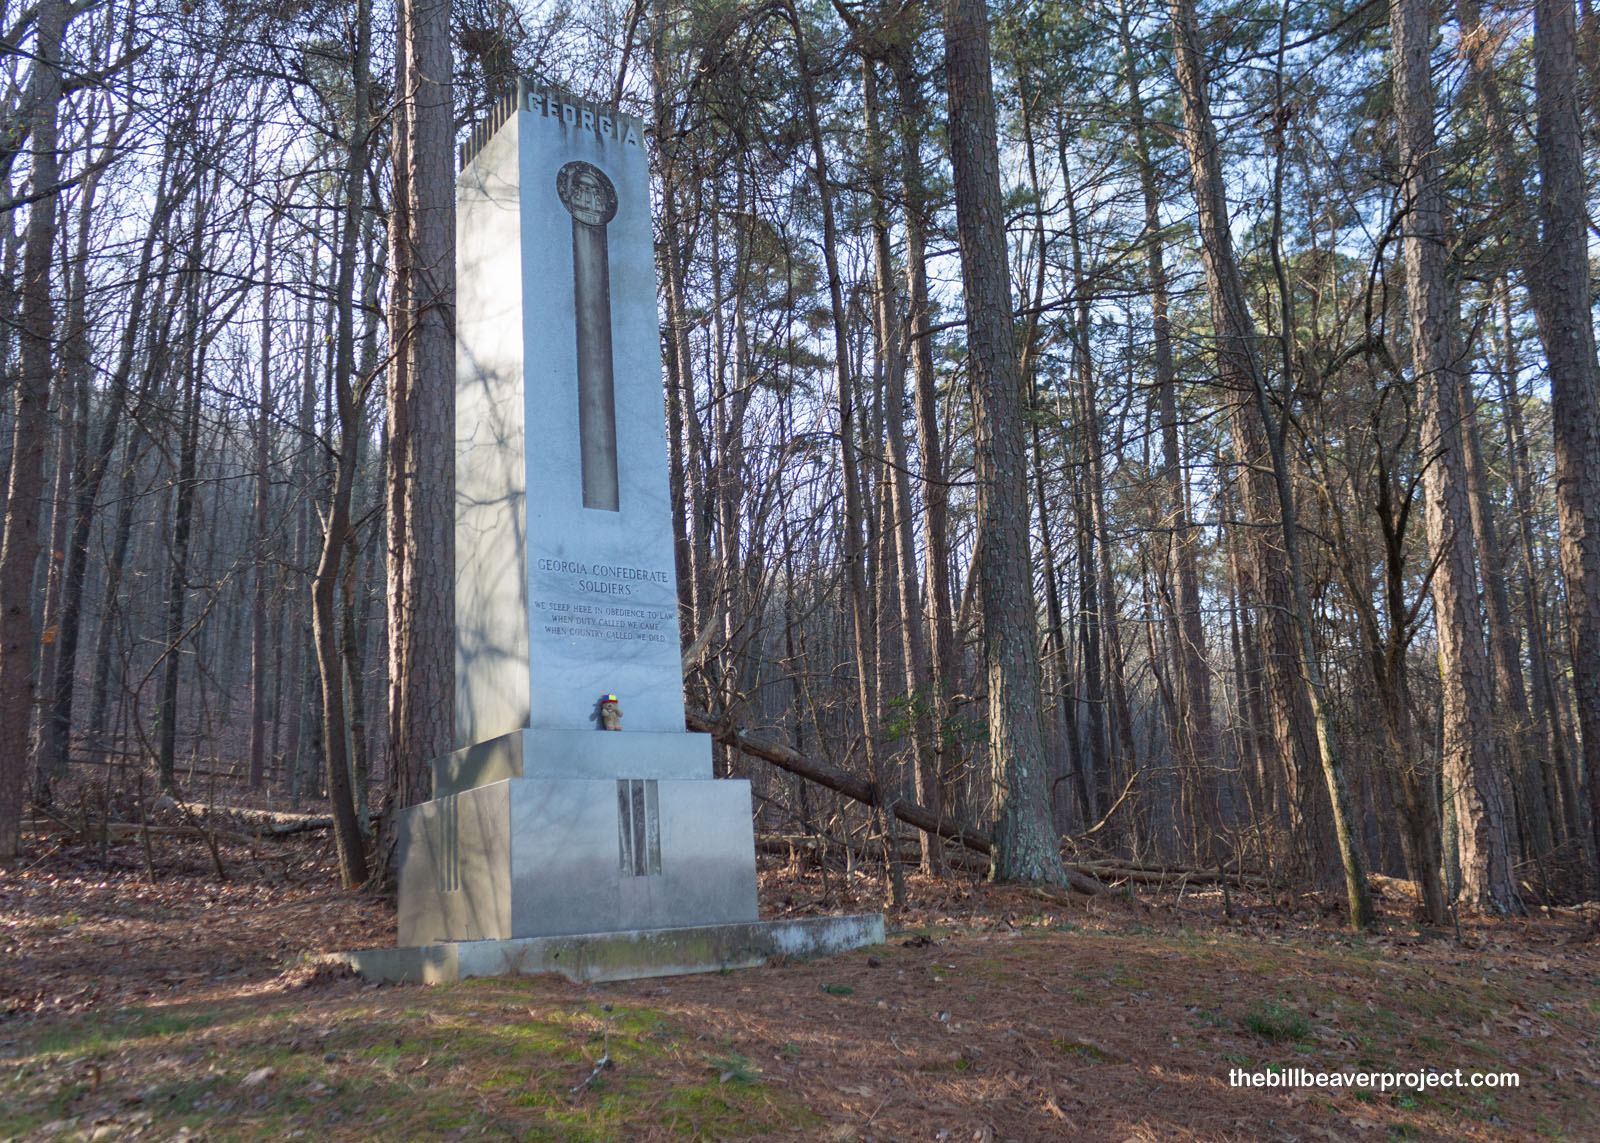 Though no troops from Georgia fought at Kennesaw Mountain, this monument honors them anyway!